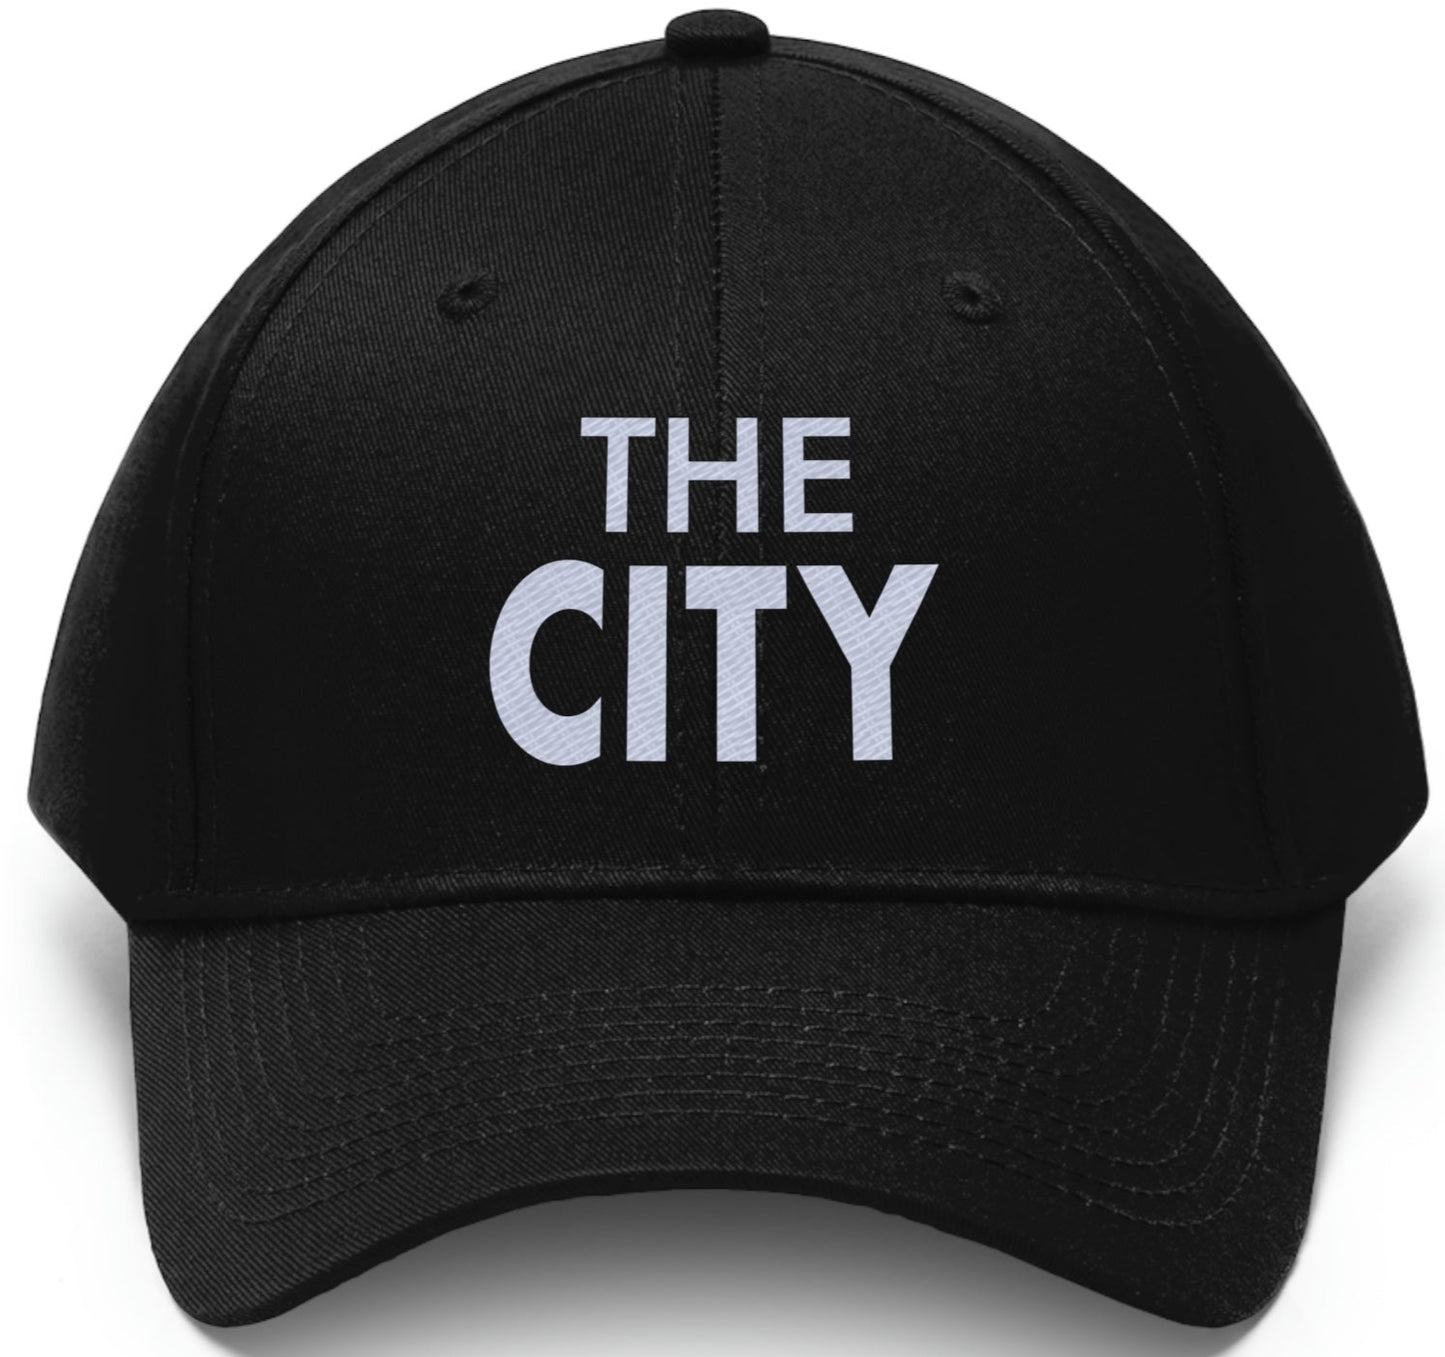 The City - Embroidered Hat